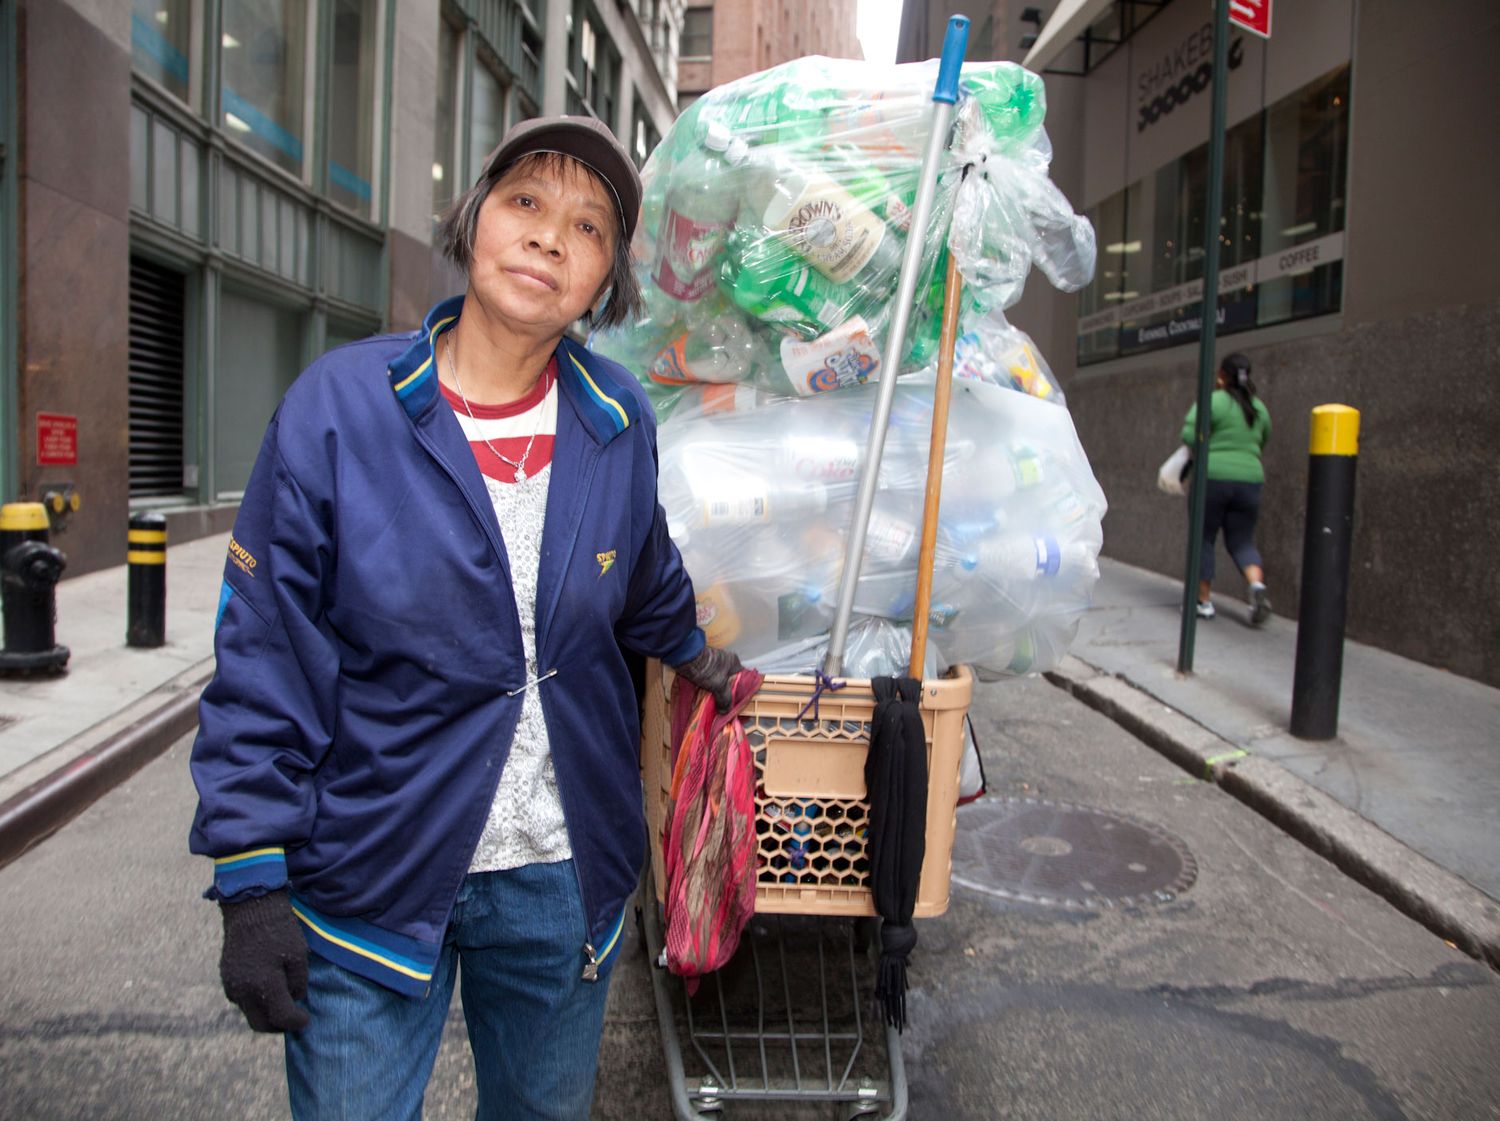 Lilly, the main character followed in the documentary Redemption (2013), pulls bottles and cans collected from NYC streets